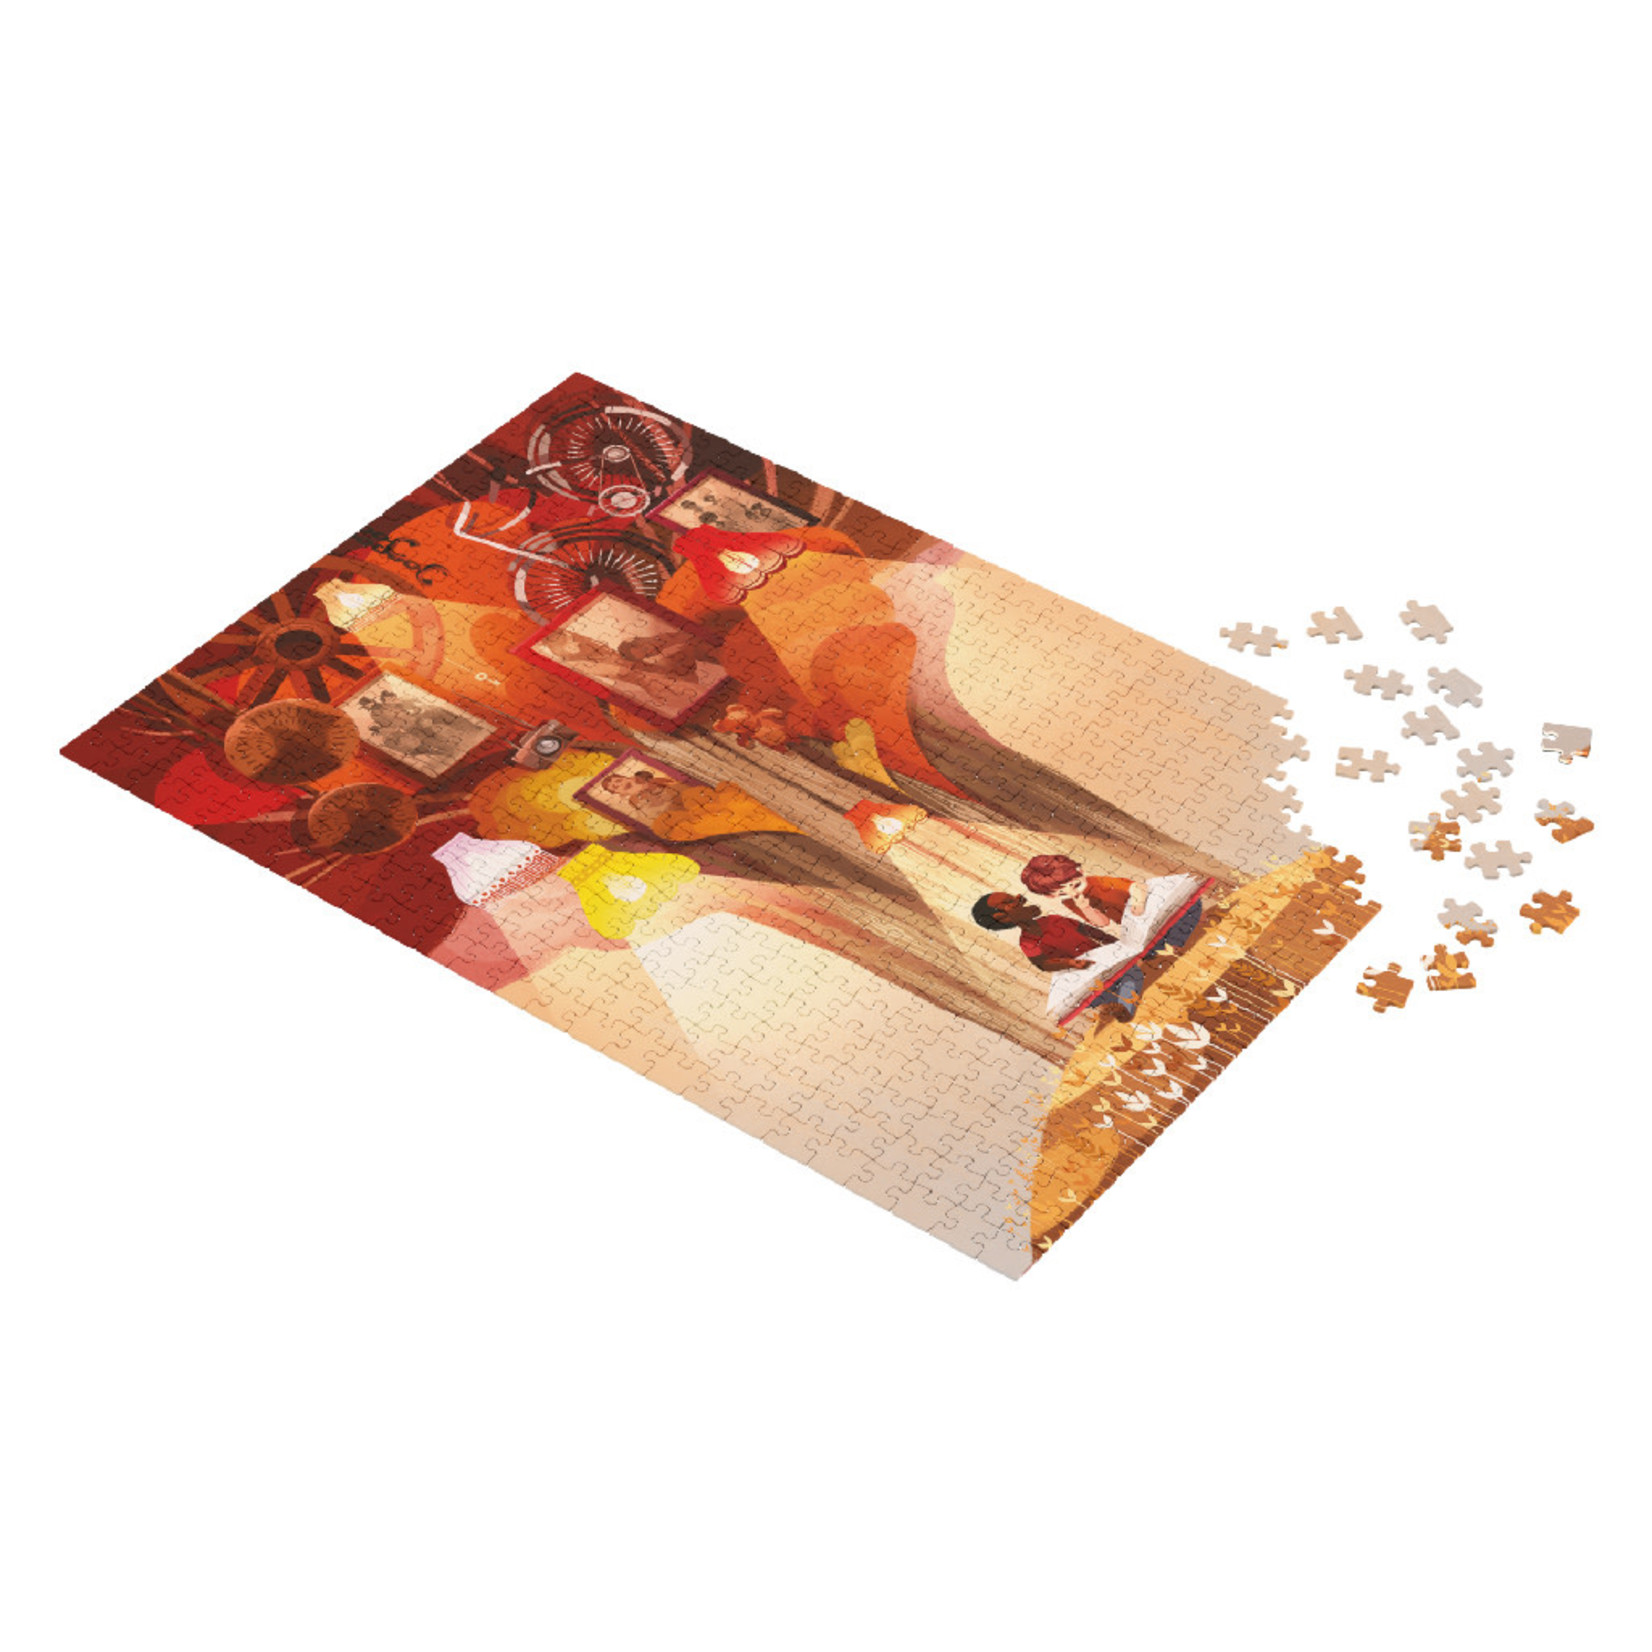 Libellud Dixit 500 piece Puzzle: Family